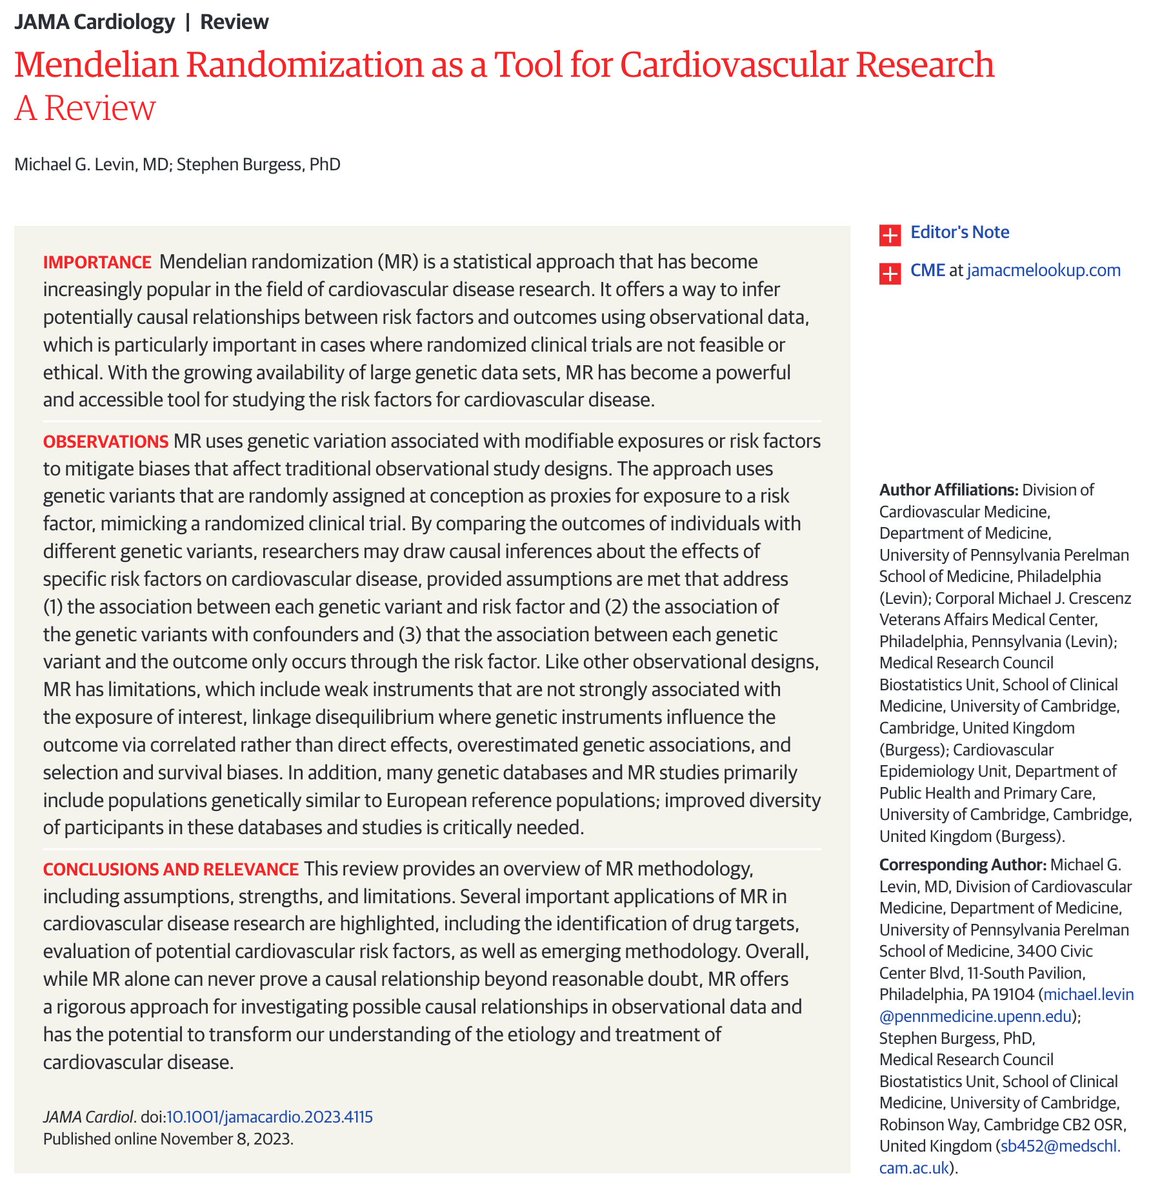 Excited to see our review of Mendelian Randomization as a Tool for Cardiovascular Research now in print @JAMACardio 1/